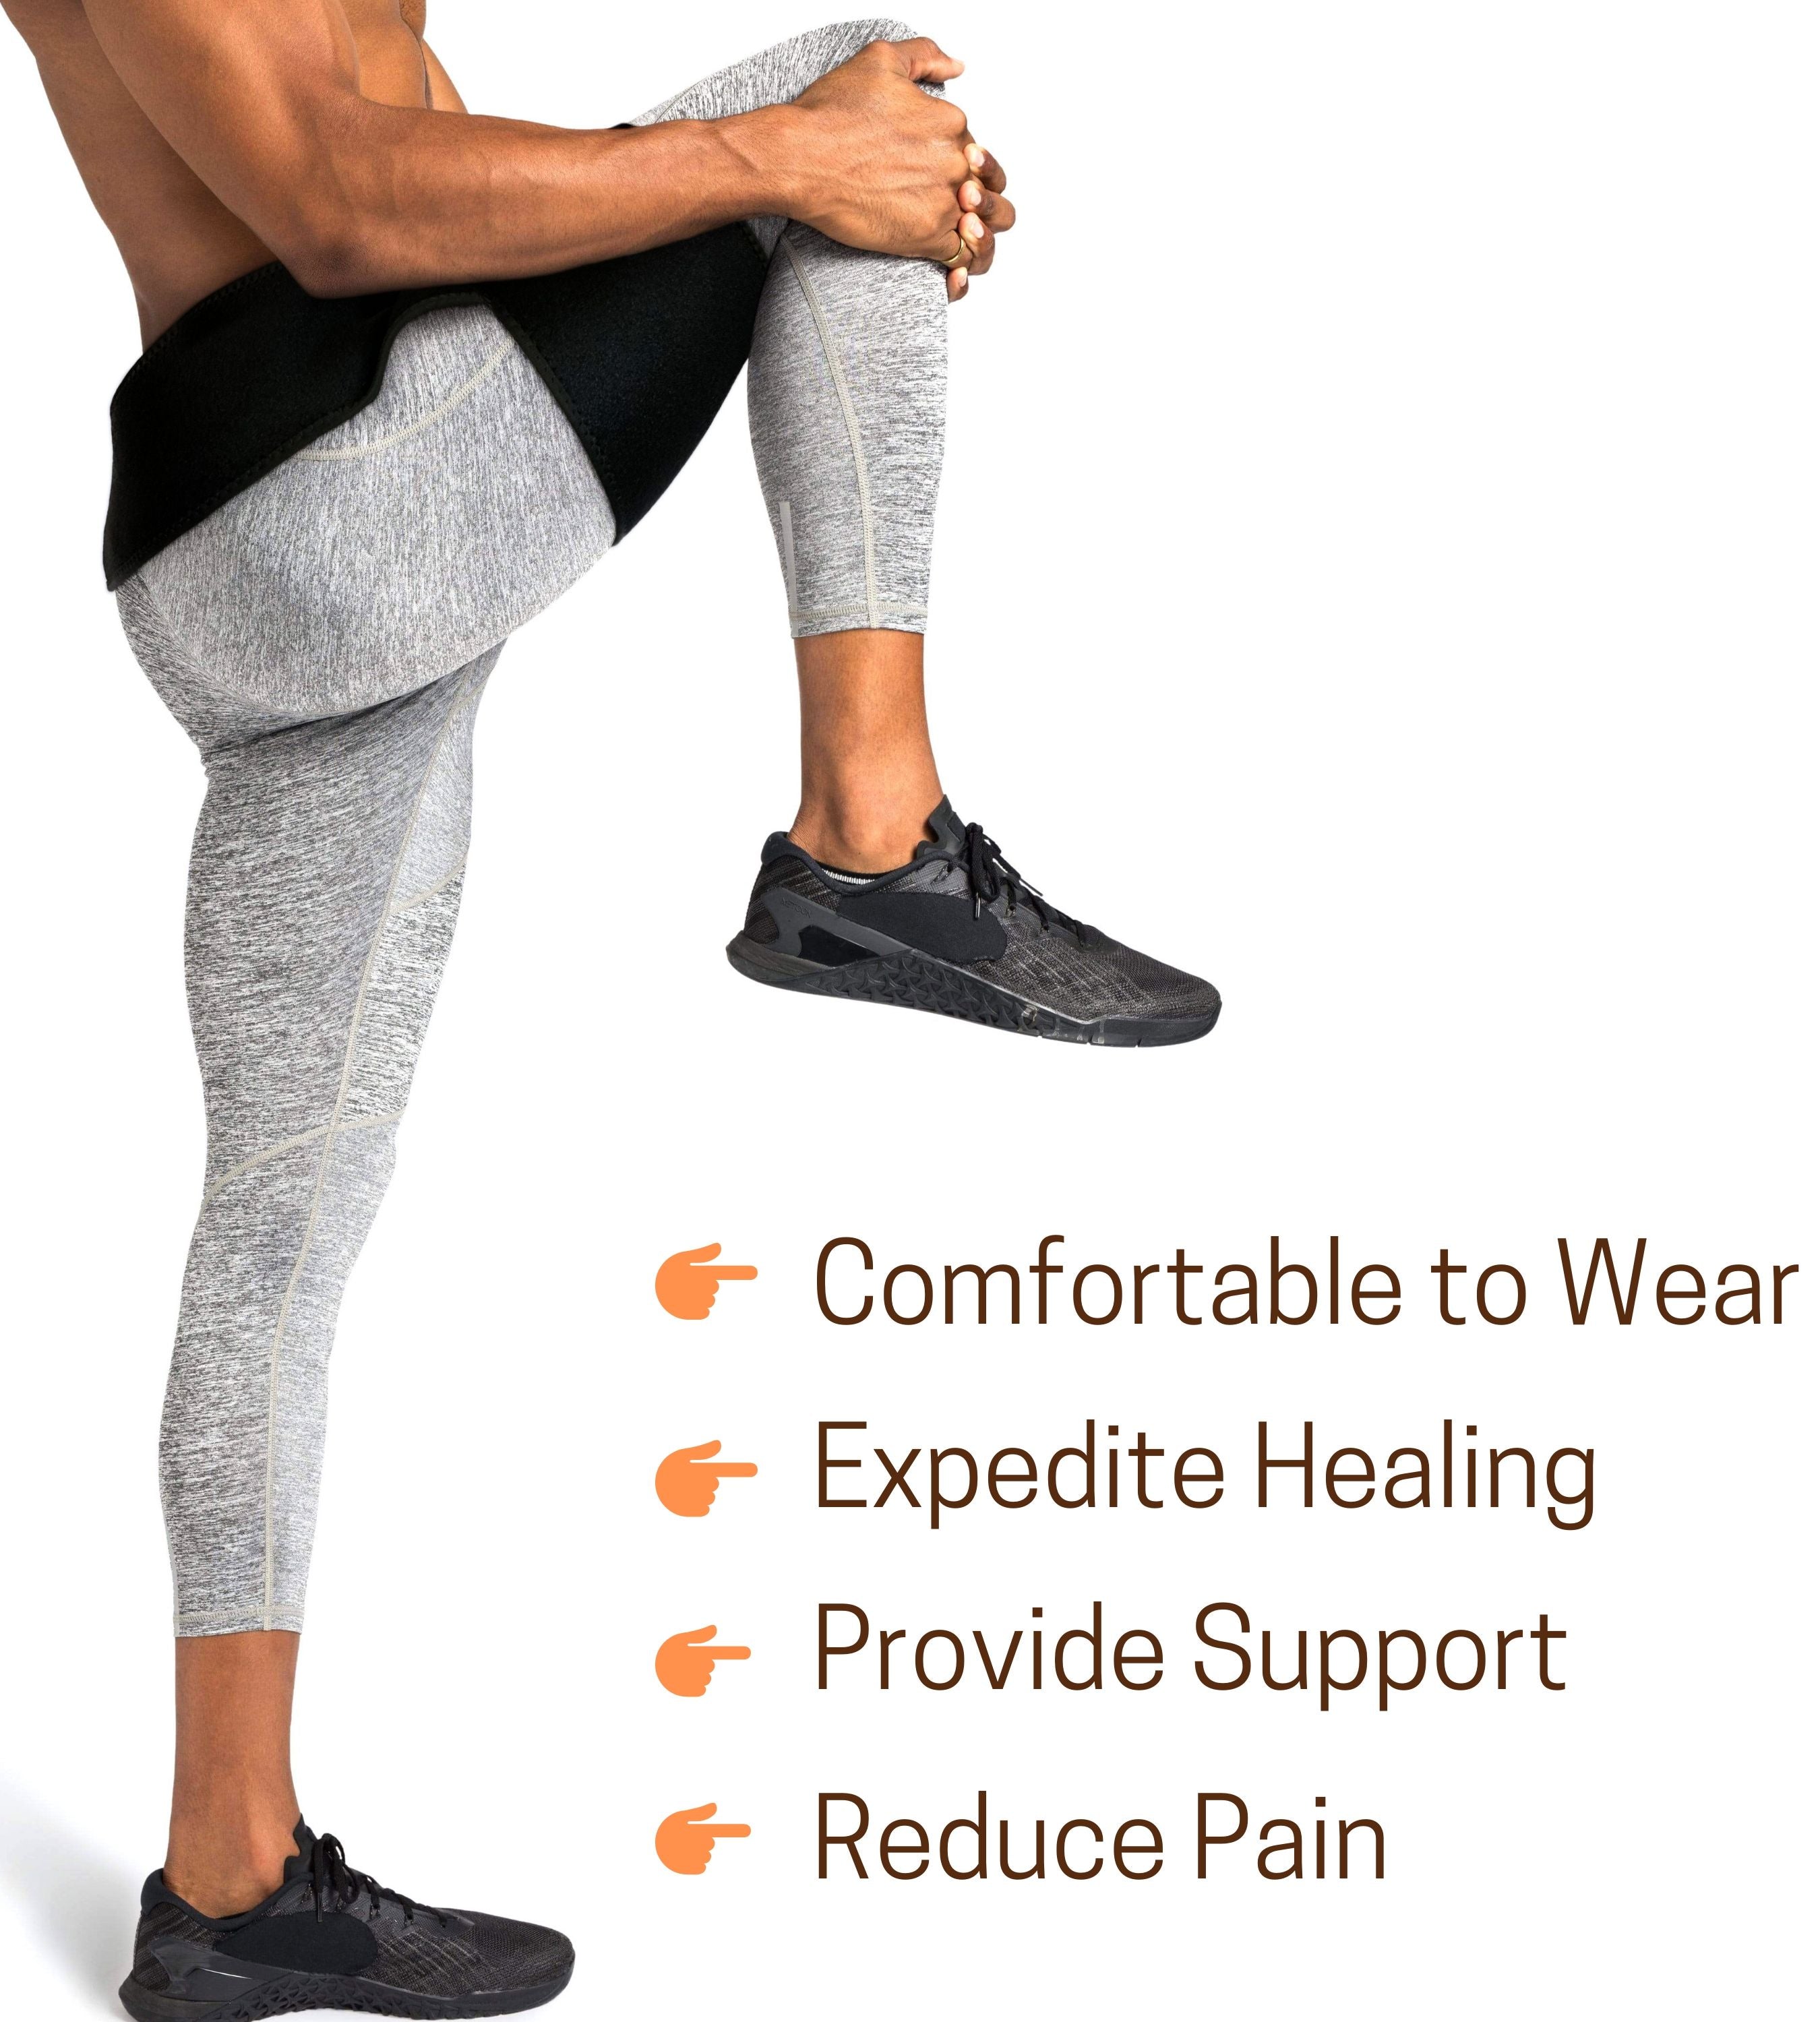 ATX Compression Wrap Hip and Groin Support Sciatica Nerve Pain Relief